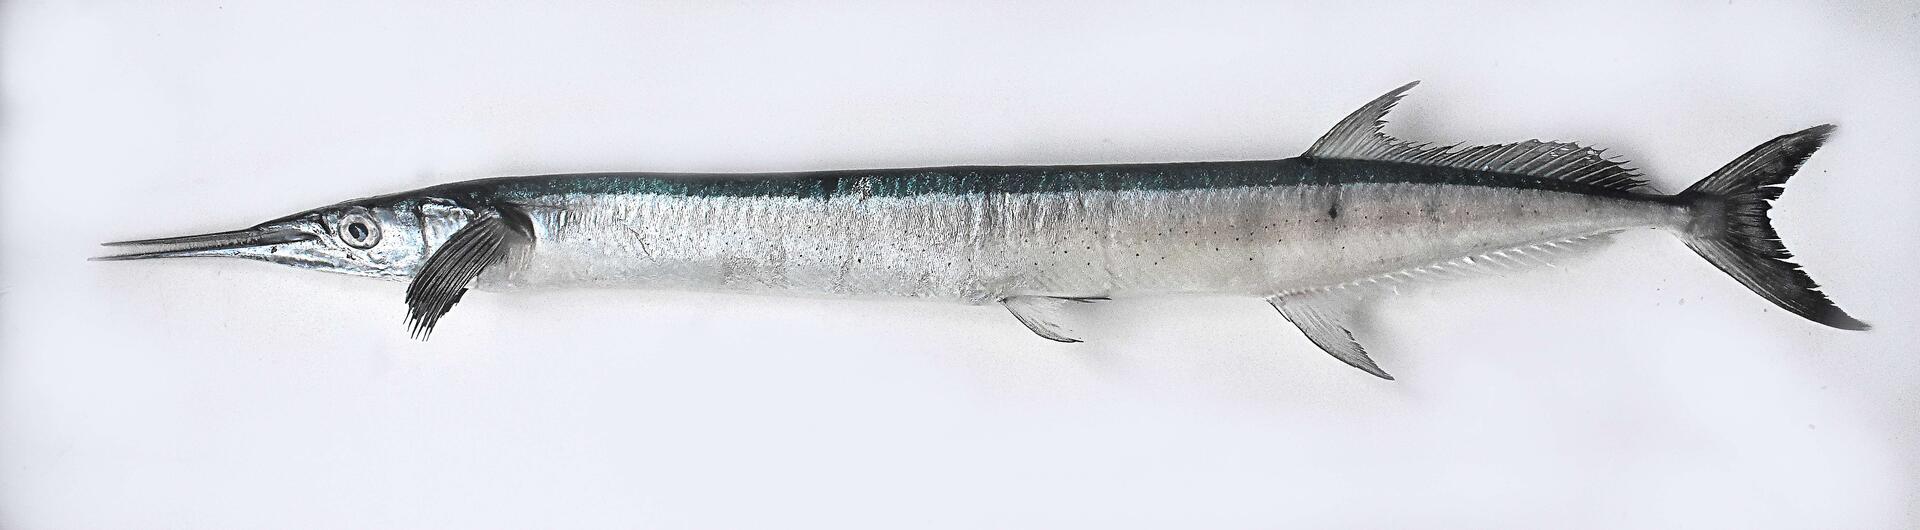 CMFRI identifies two new species of needlefish from Indian waters